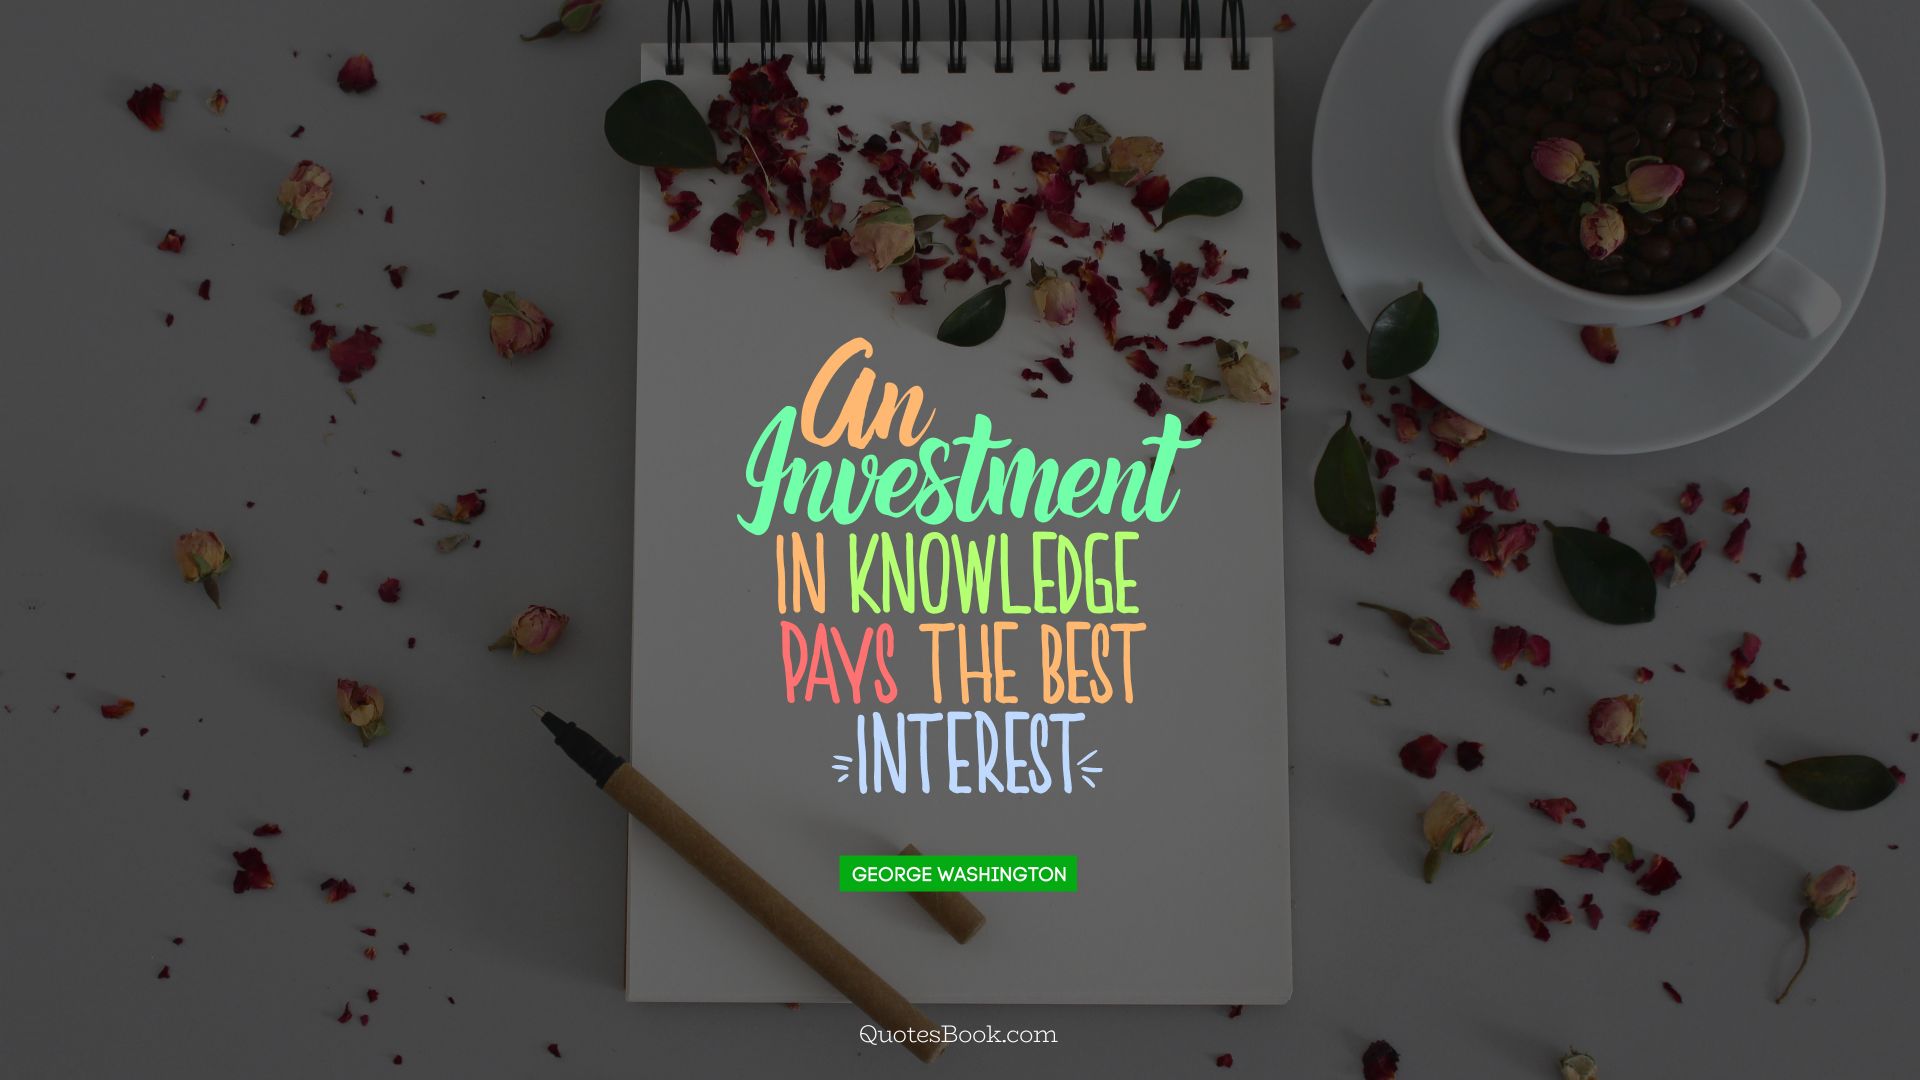 An investment in knowledge pays the best ginteresth. - Quote by George Washington